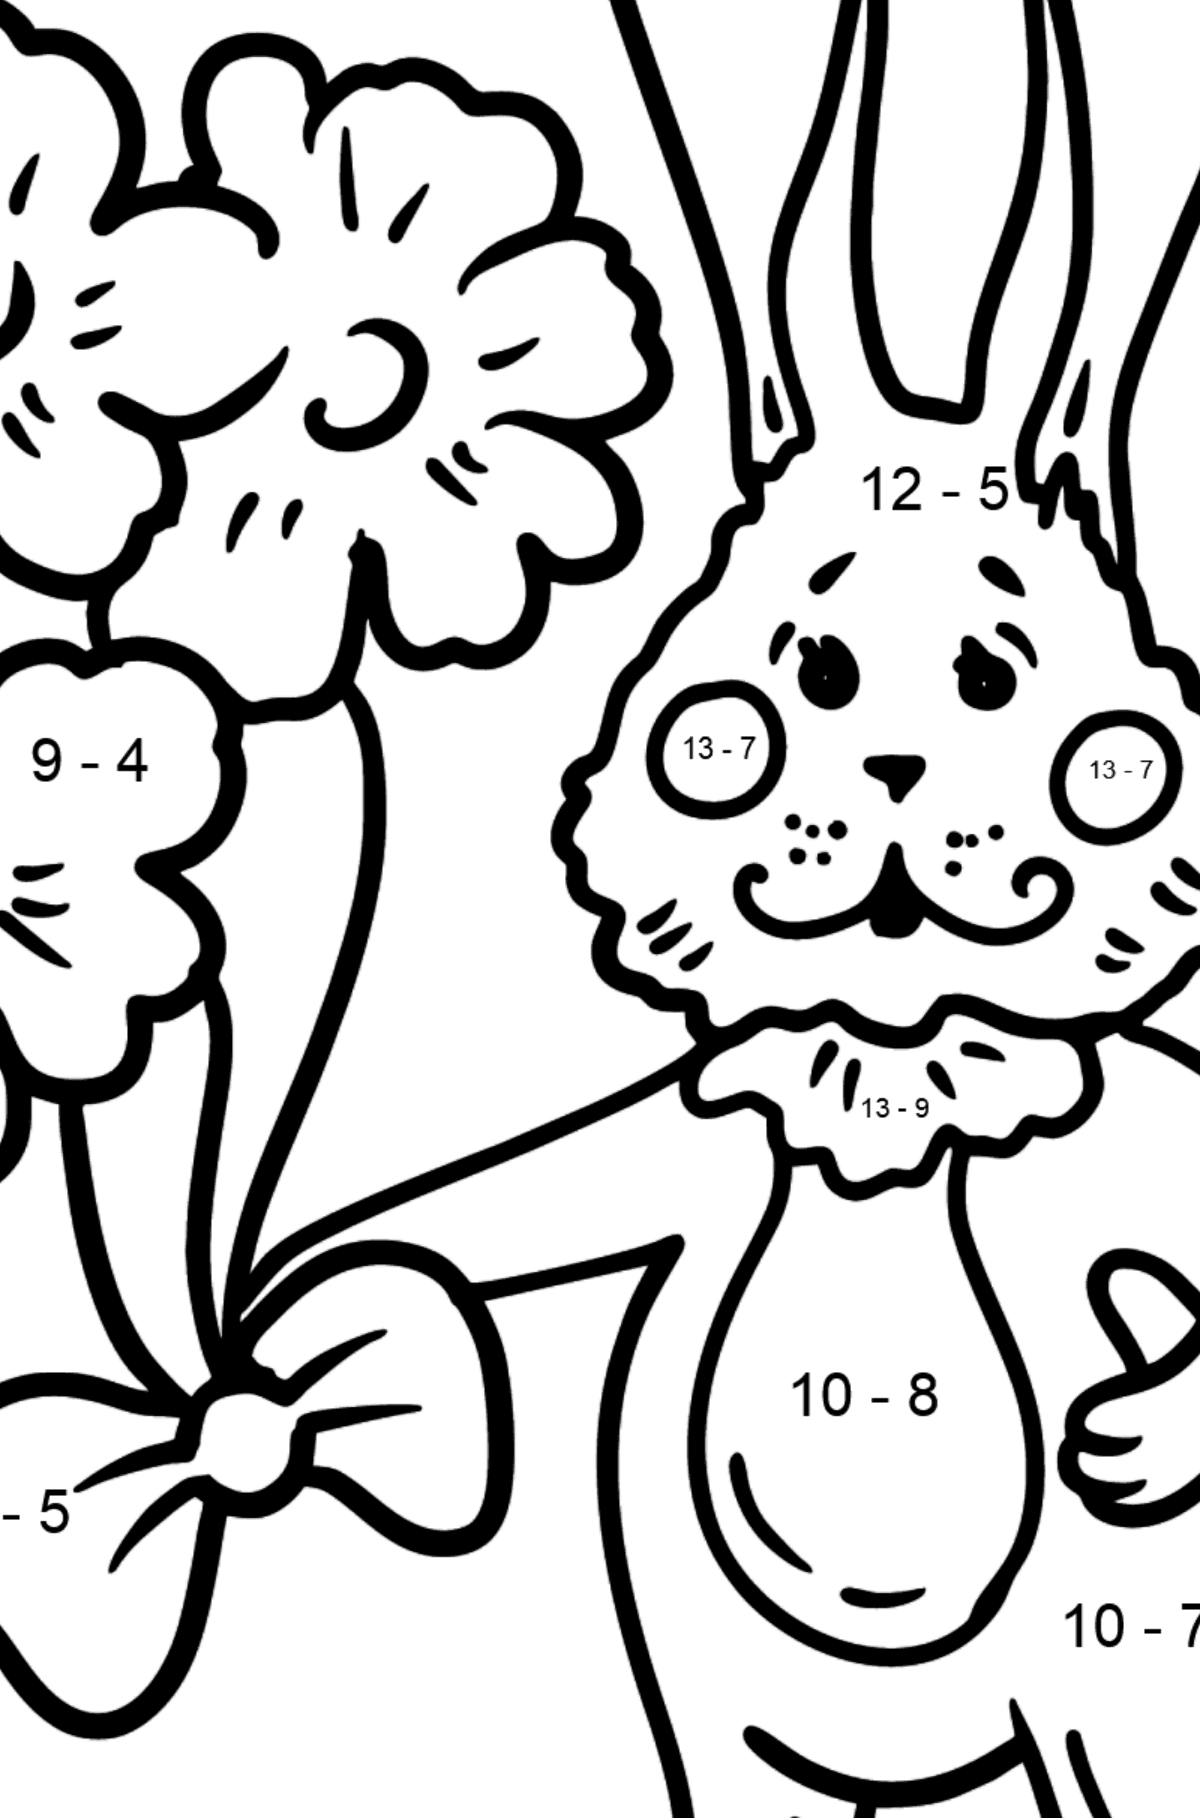 Bunny with a Bouquet of Flowers coloring page - Math Coloring - Subtraction for Kids